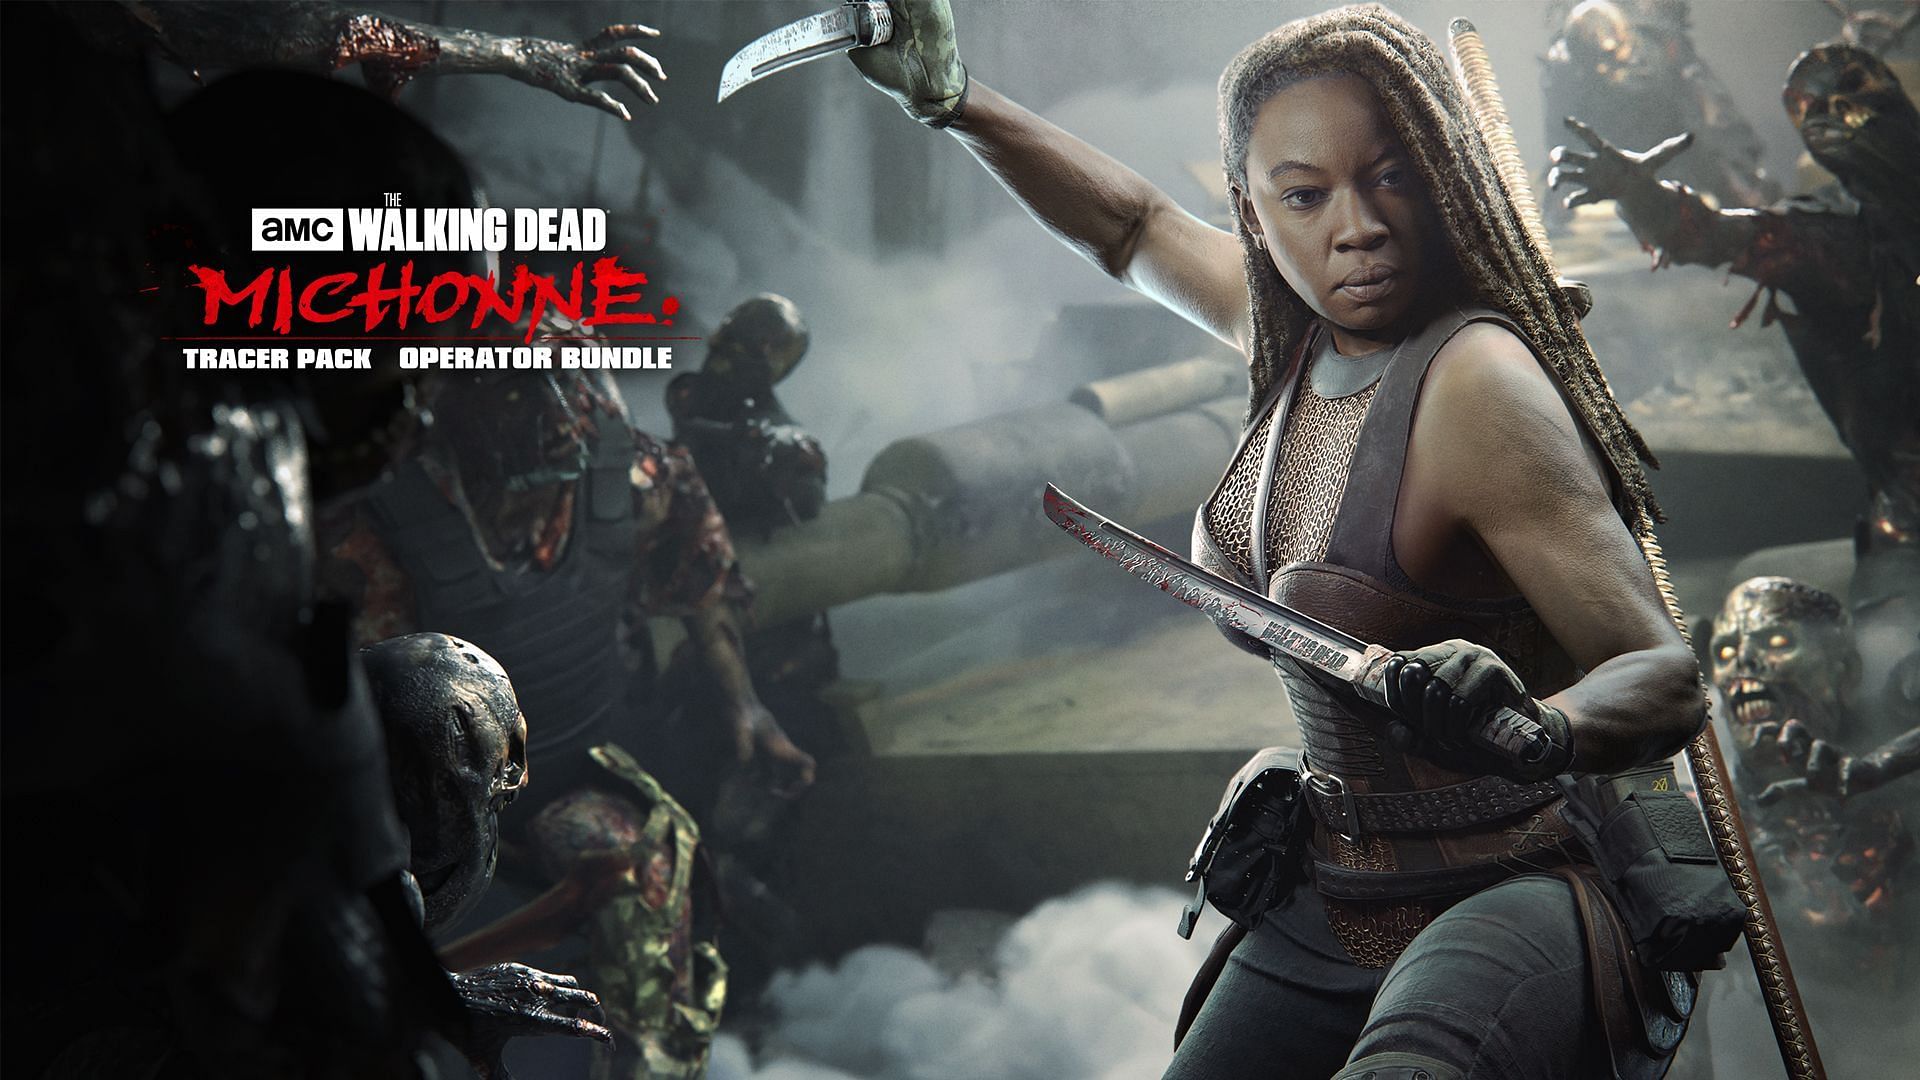 The Walking Dead Michonne operator bundle in Warzone and MW3